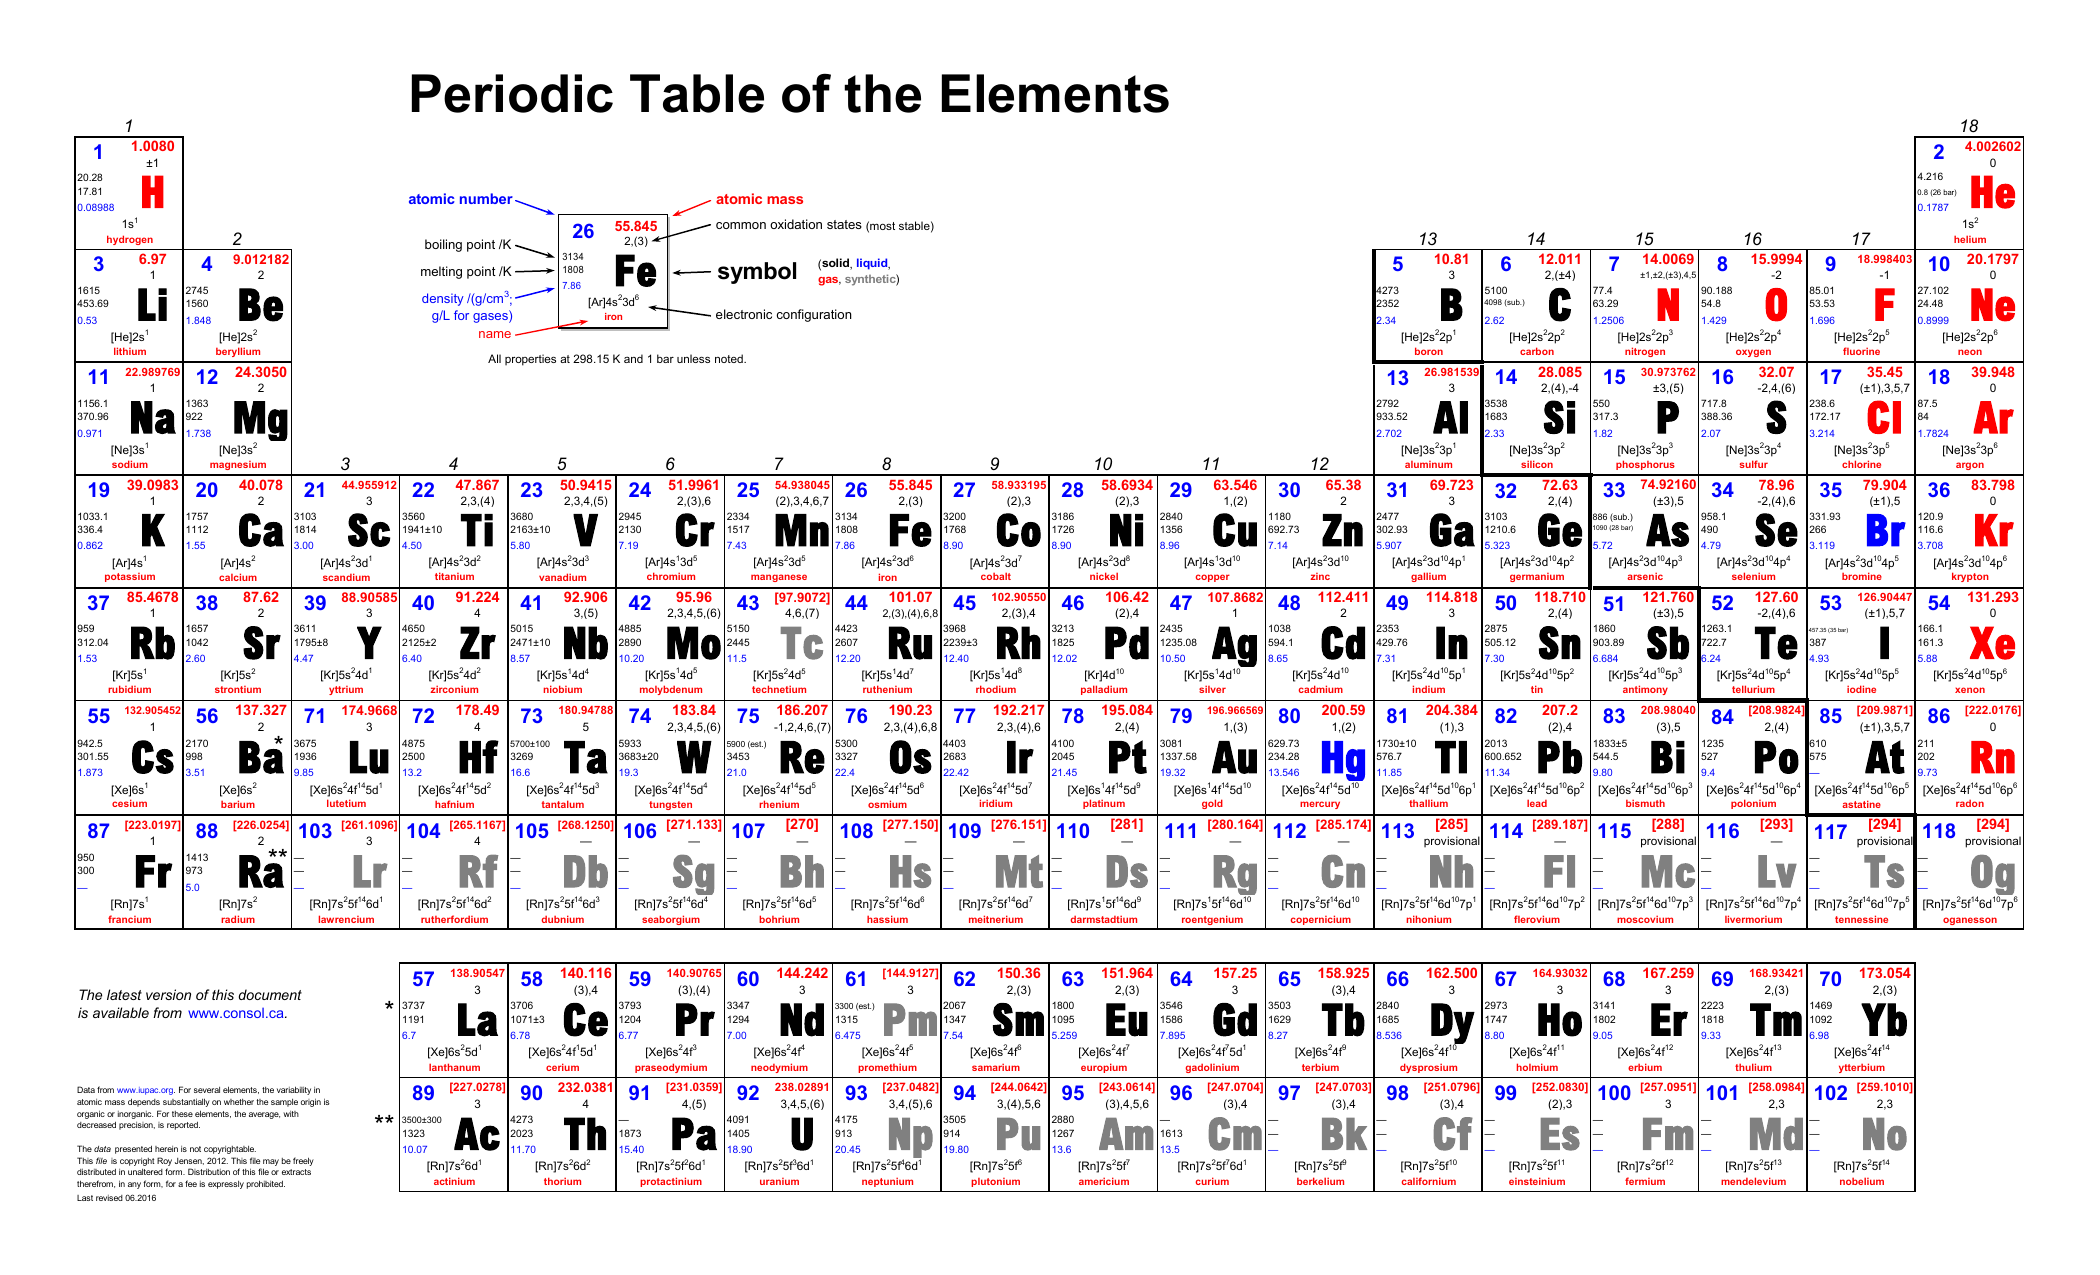 element 11 on periodic table hydrogen atomic number